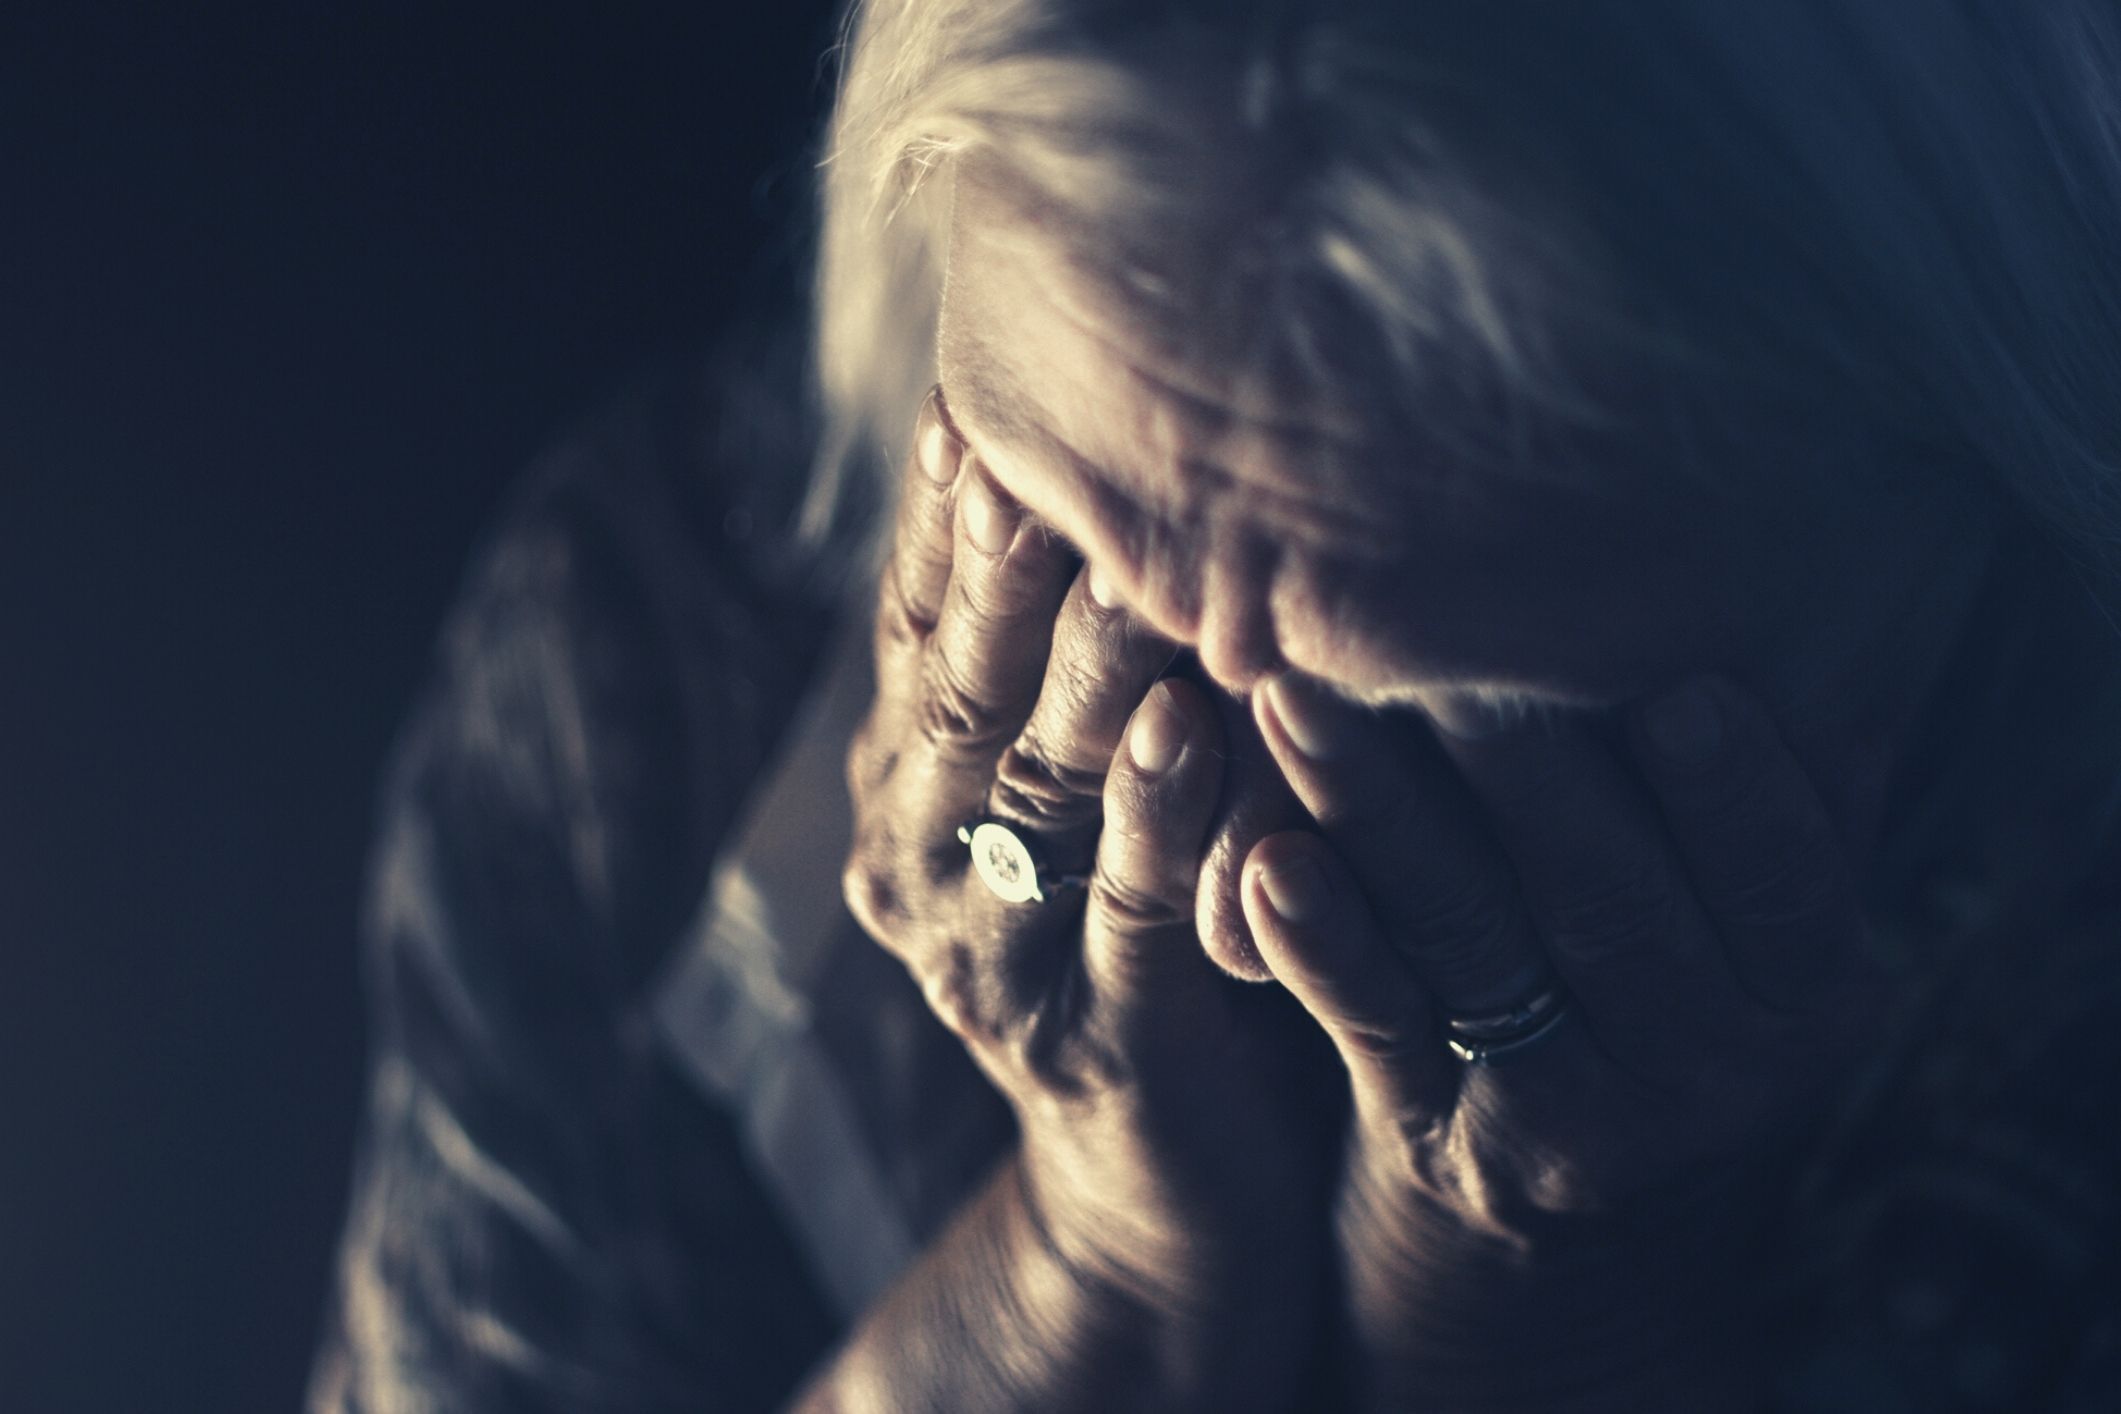 Sexual assault in aged care